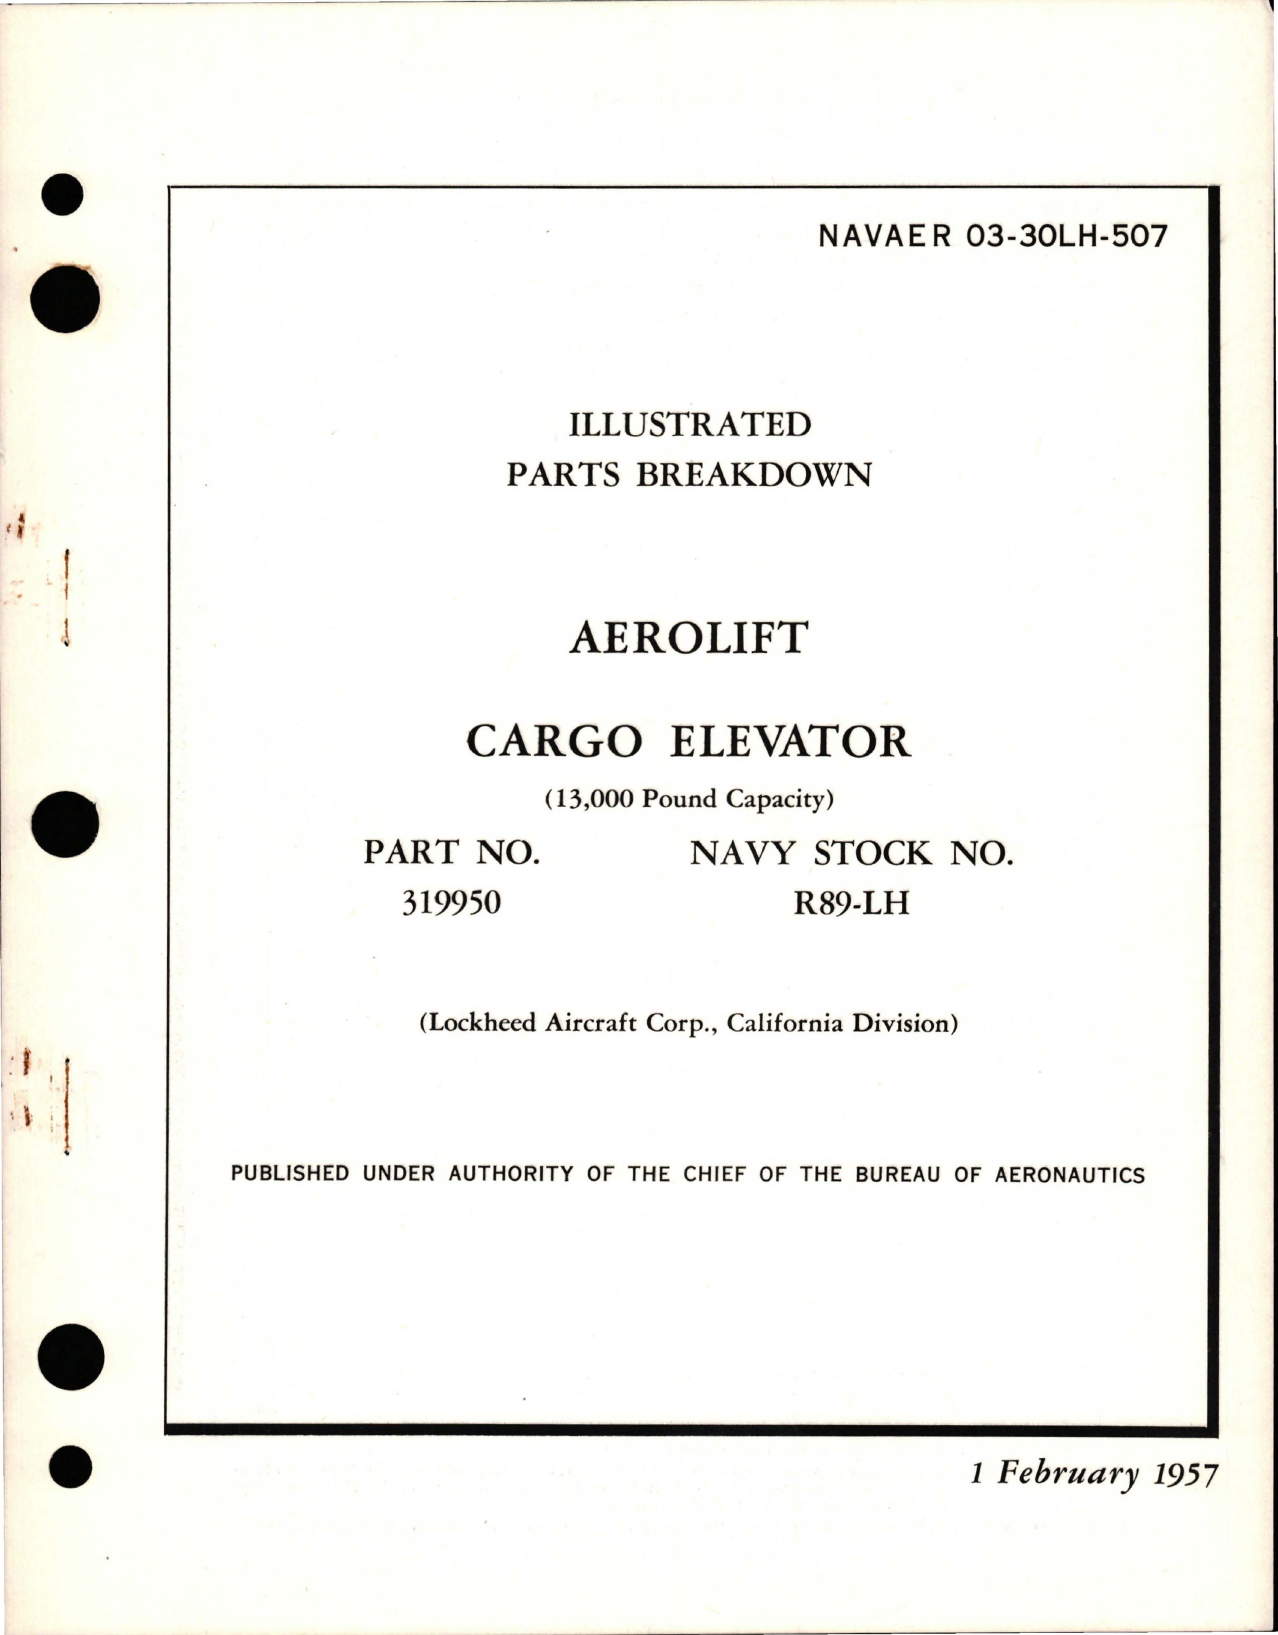 Sample page 1 from AirCorps Library document: Illustrated Parts Breakdown for Aerolift Cargo Elevator (13,000 lb capacity) Part 319950 